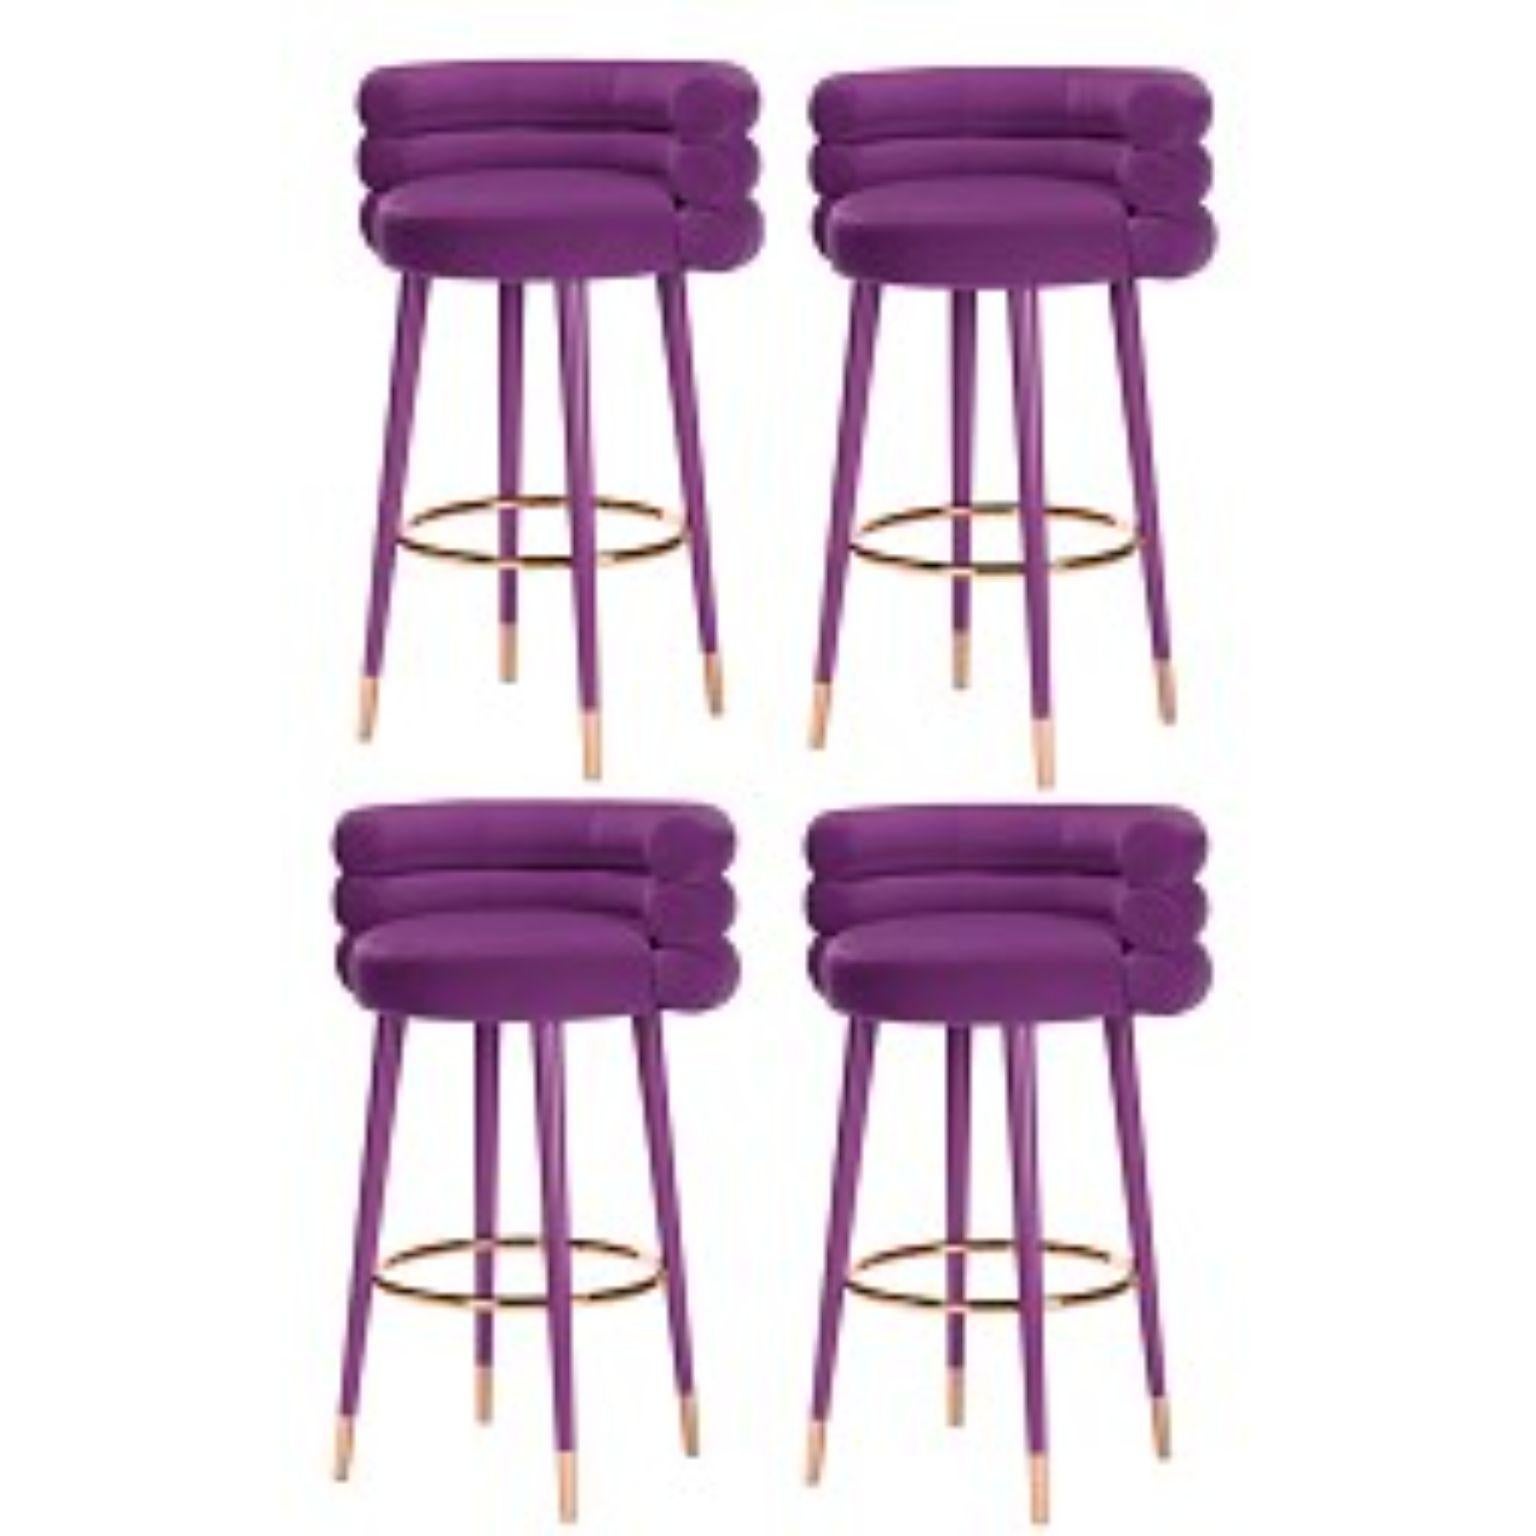 Set of 4 Marshmallow bar stools, Royal Stranger
Dimensions: 100 x 70 x 60 cm
Materials: Velvet upholstery, brass
Available in: Mint green, light pink, Royal green and Royal red

Royal stranger is an exclusive furniture brand determined to bring